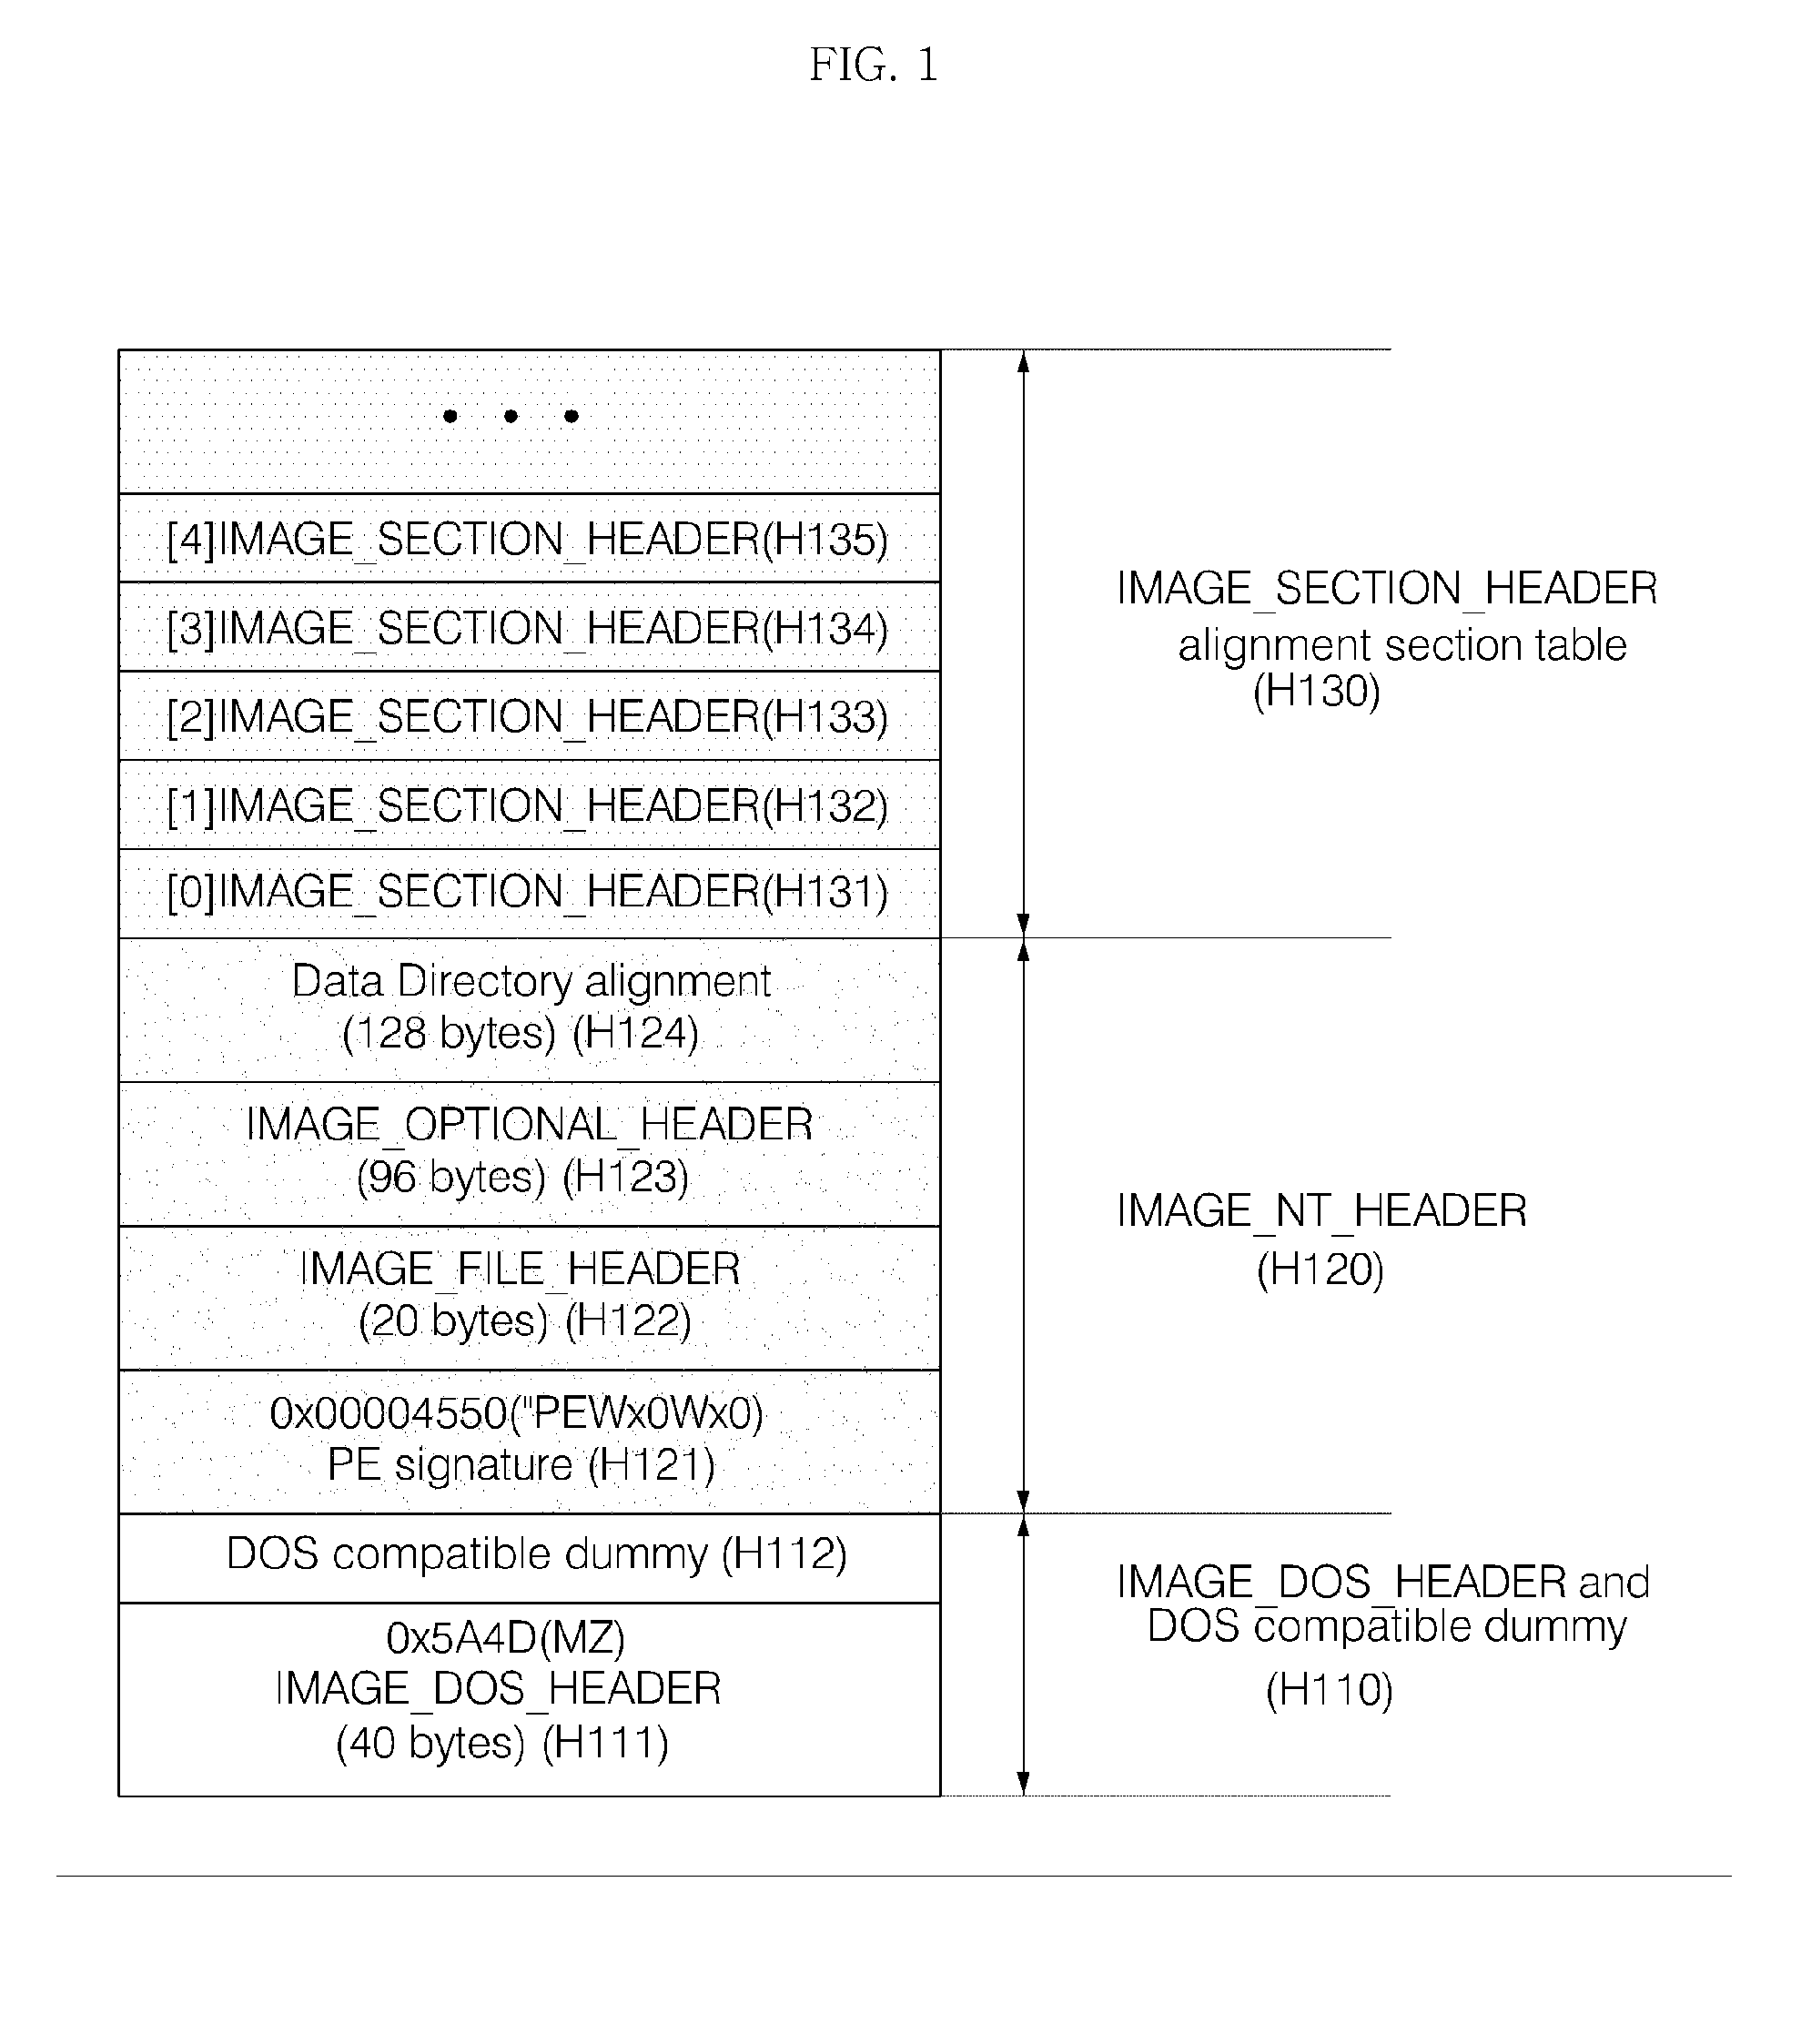 Device and method for detecting packed pe file